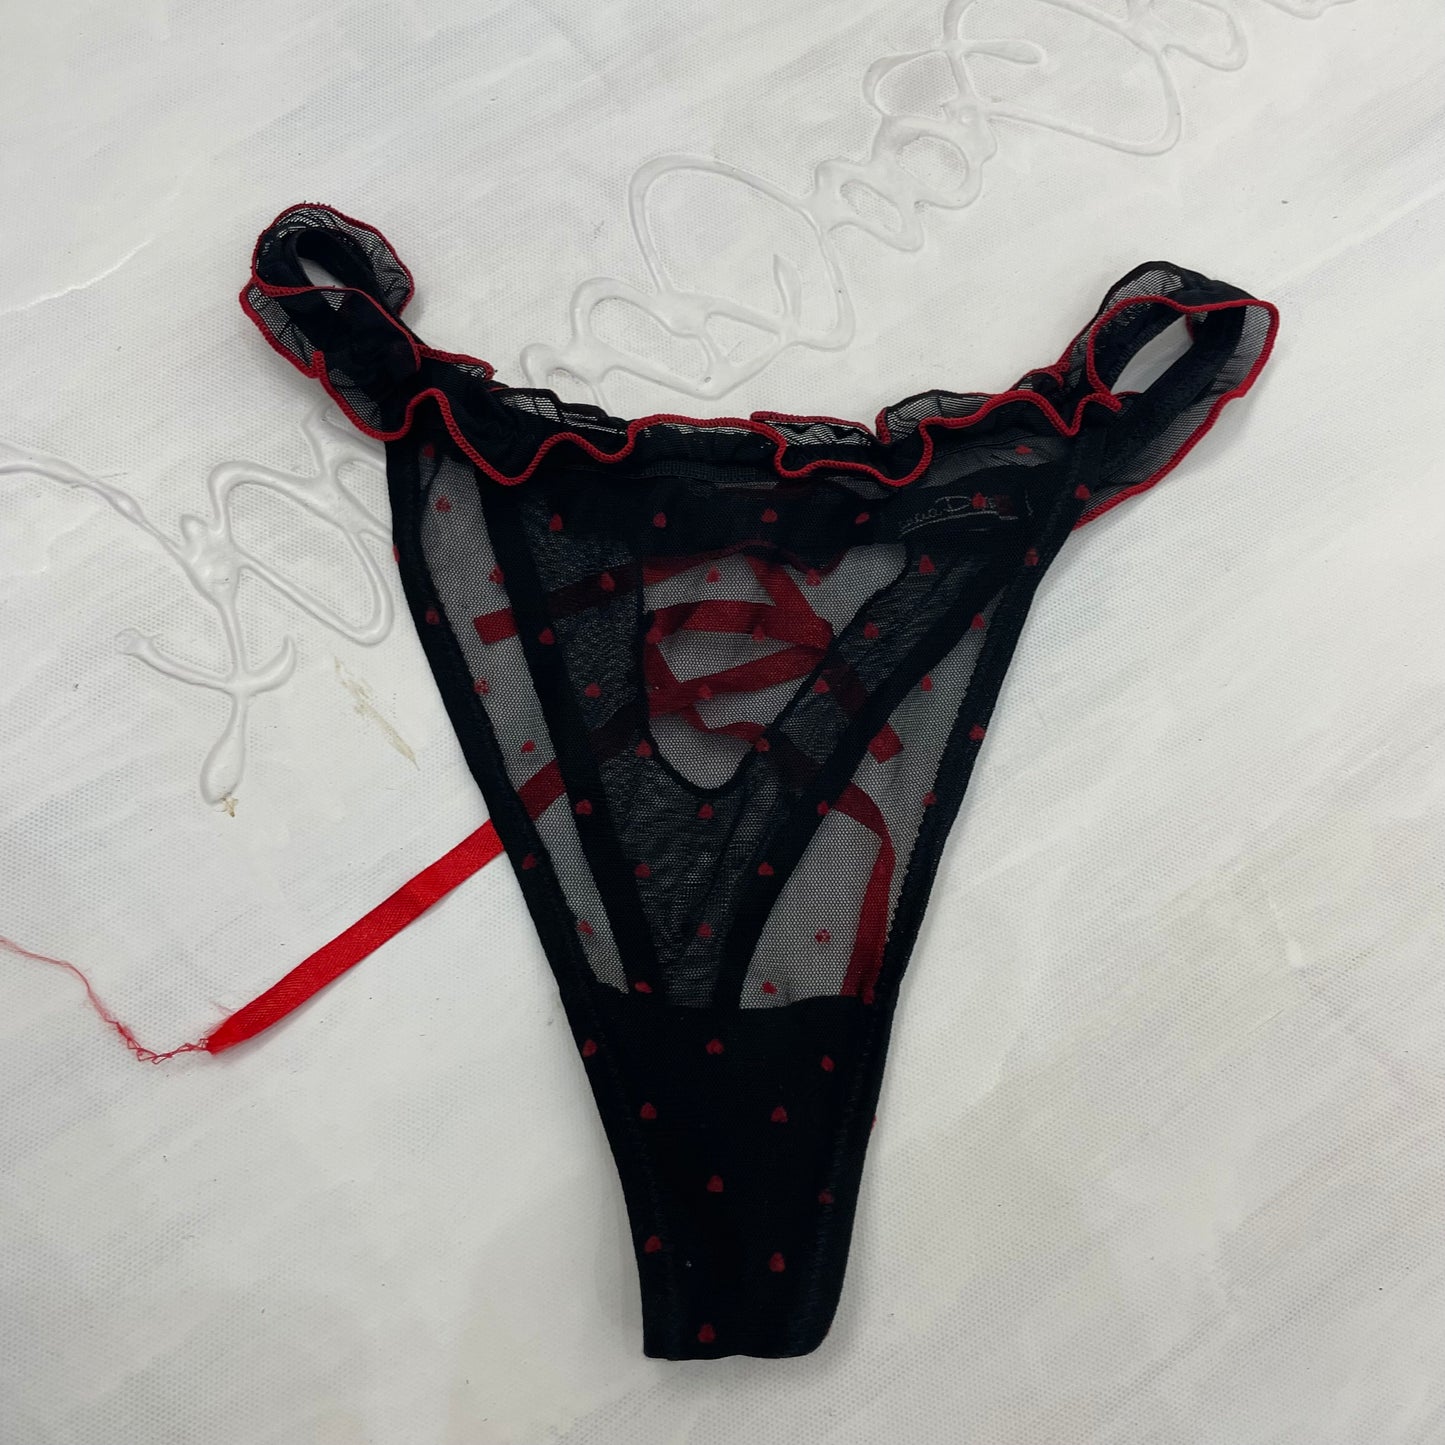 GALENTINES DAY DROP | small black mesh underwear with red bow